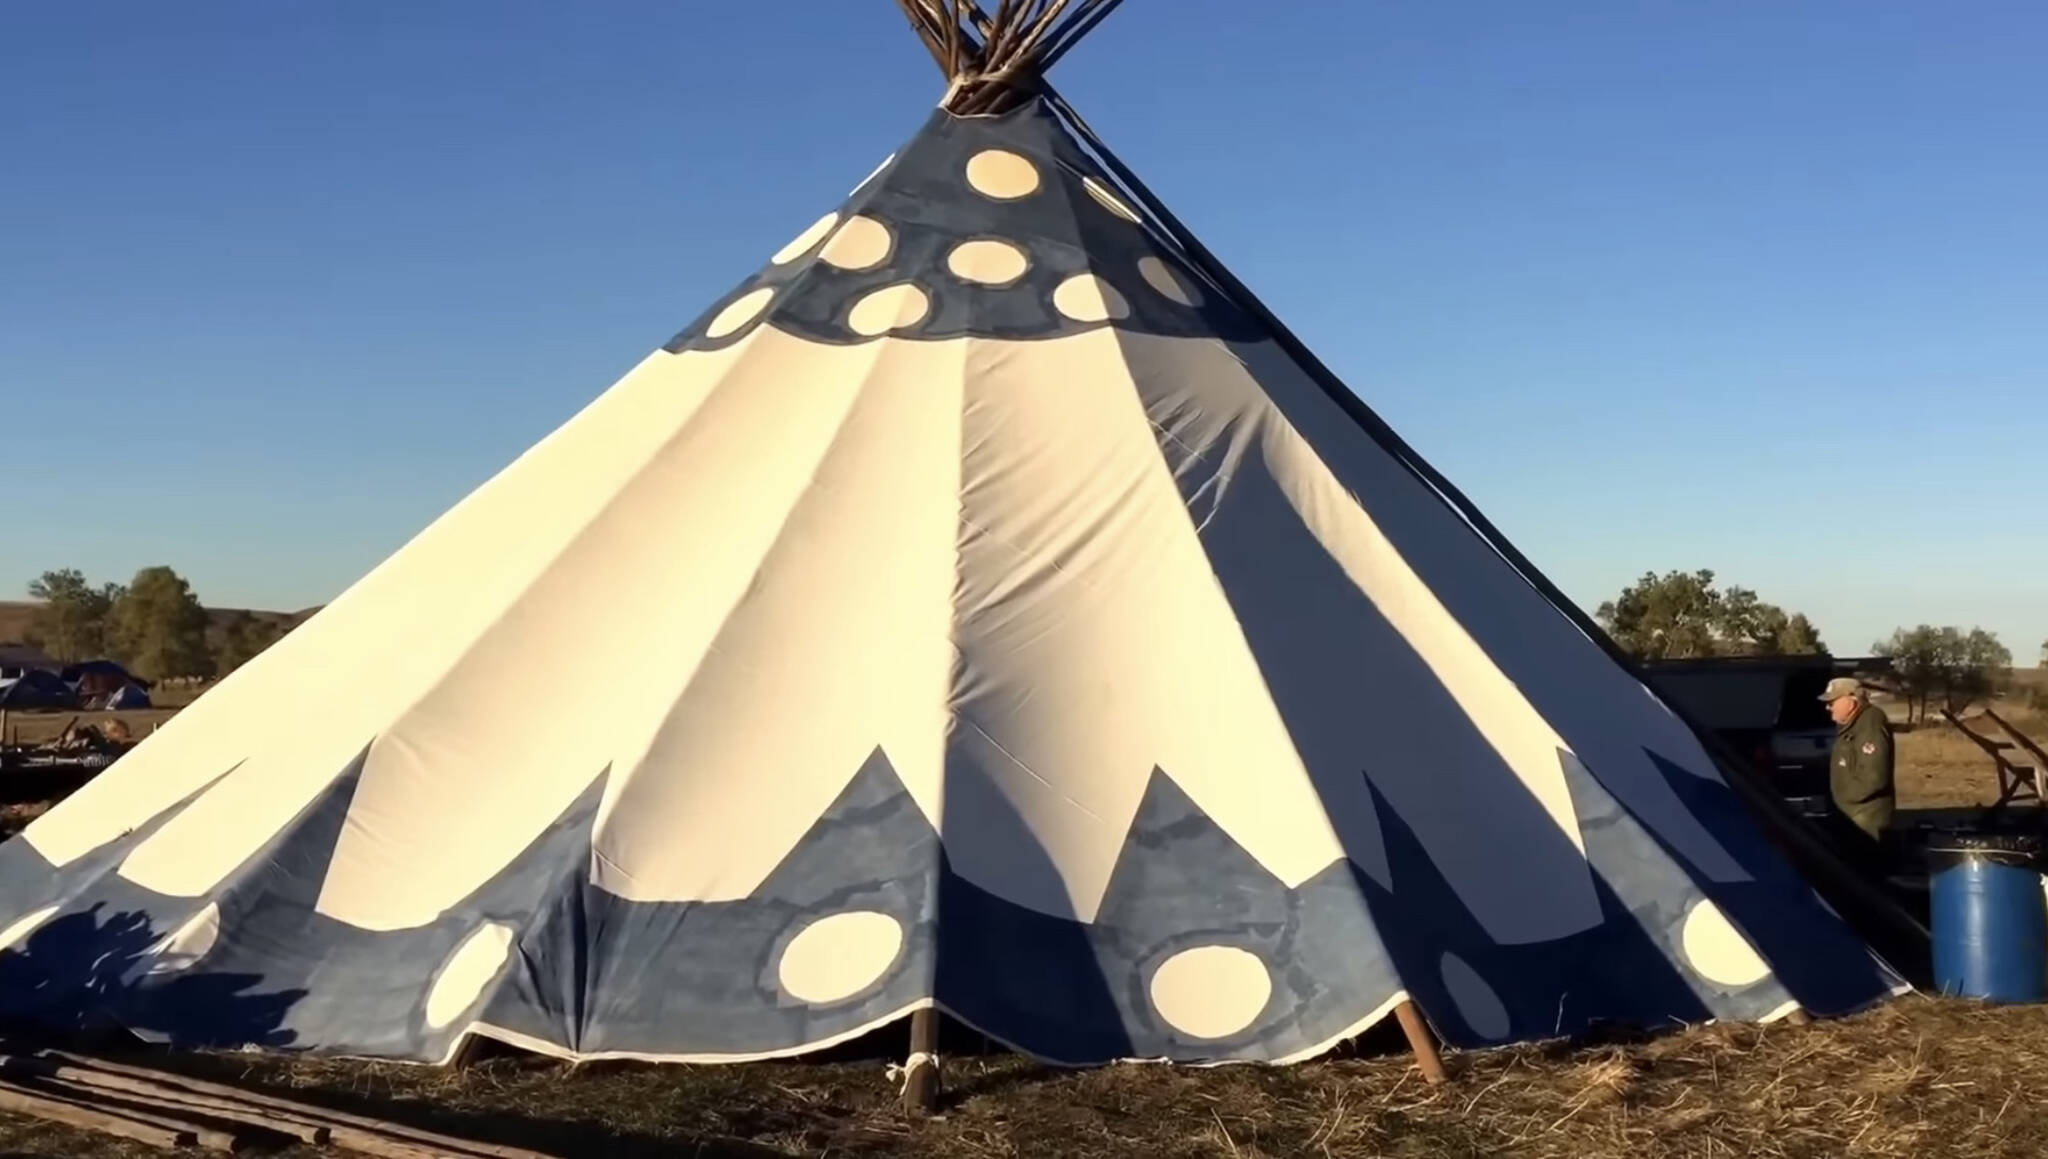 ARK’s tipi kitchen at Standing Rock in 2016, the same one used a month earlier for Baton Rouge flood relief. (Photo provided)